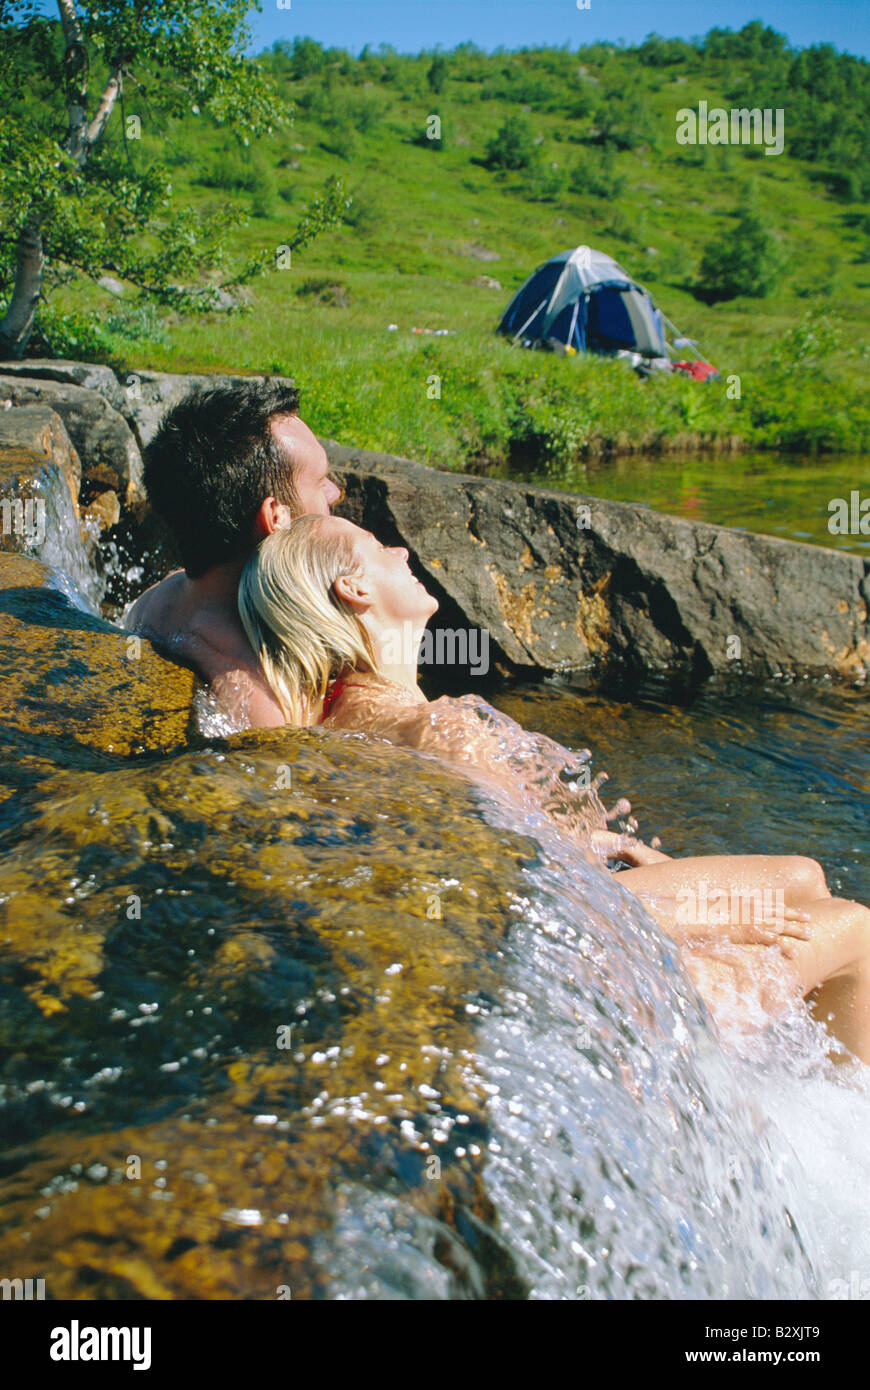 Couple outdoors par camping relaxing in stream Banque D'Images